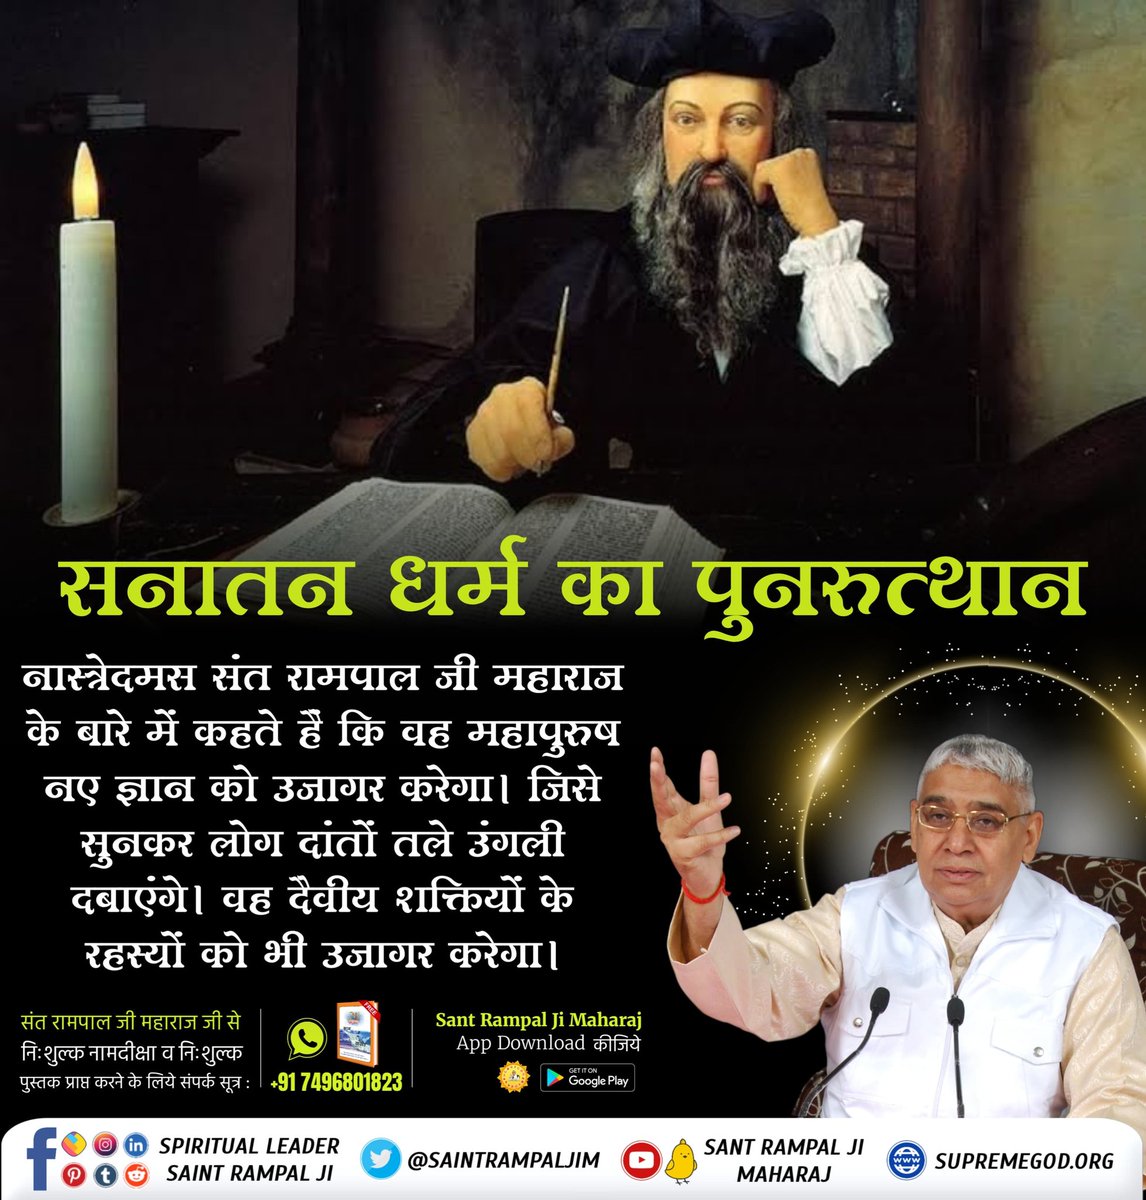 #आदि_सनातनधर्म_होगाप्रतिष्ठित
The famous prophet was completely convinced that a saint born in India will surely be the savior of the whole world. He will establish the ancient Sanatan Dharma by developing new public consciousness with his knowledge in the whole world.